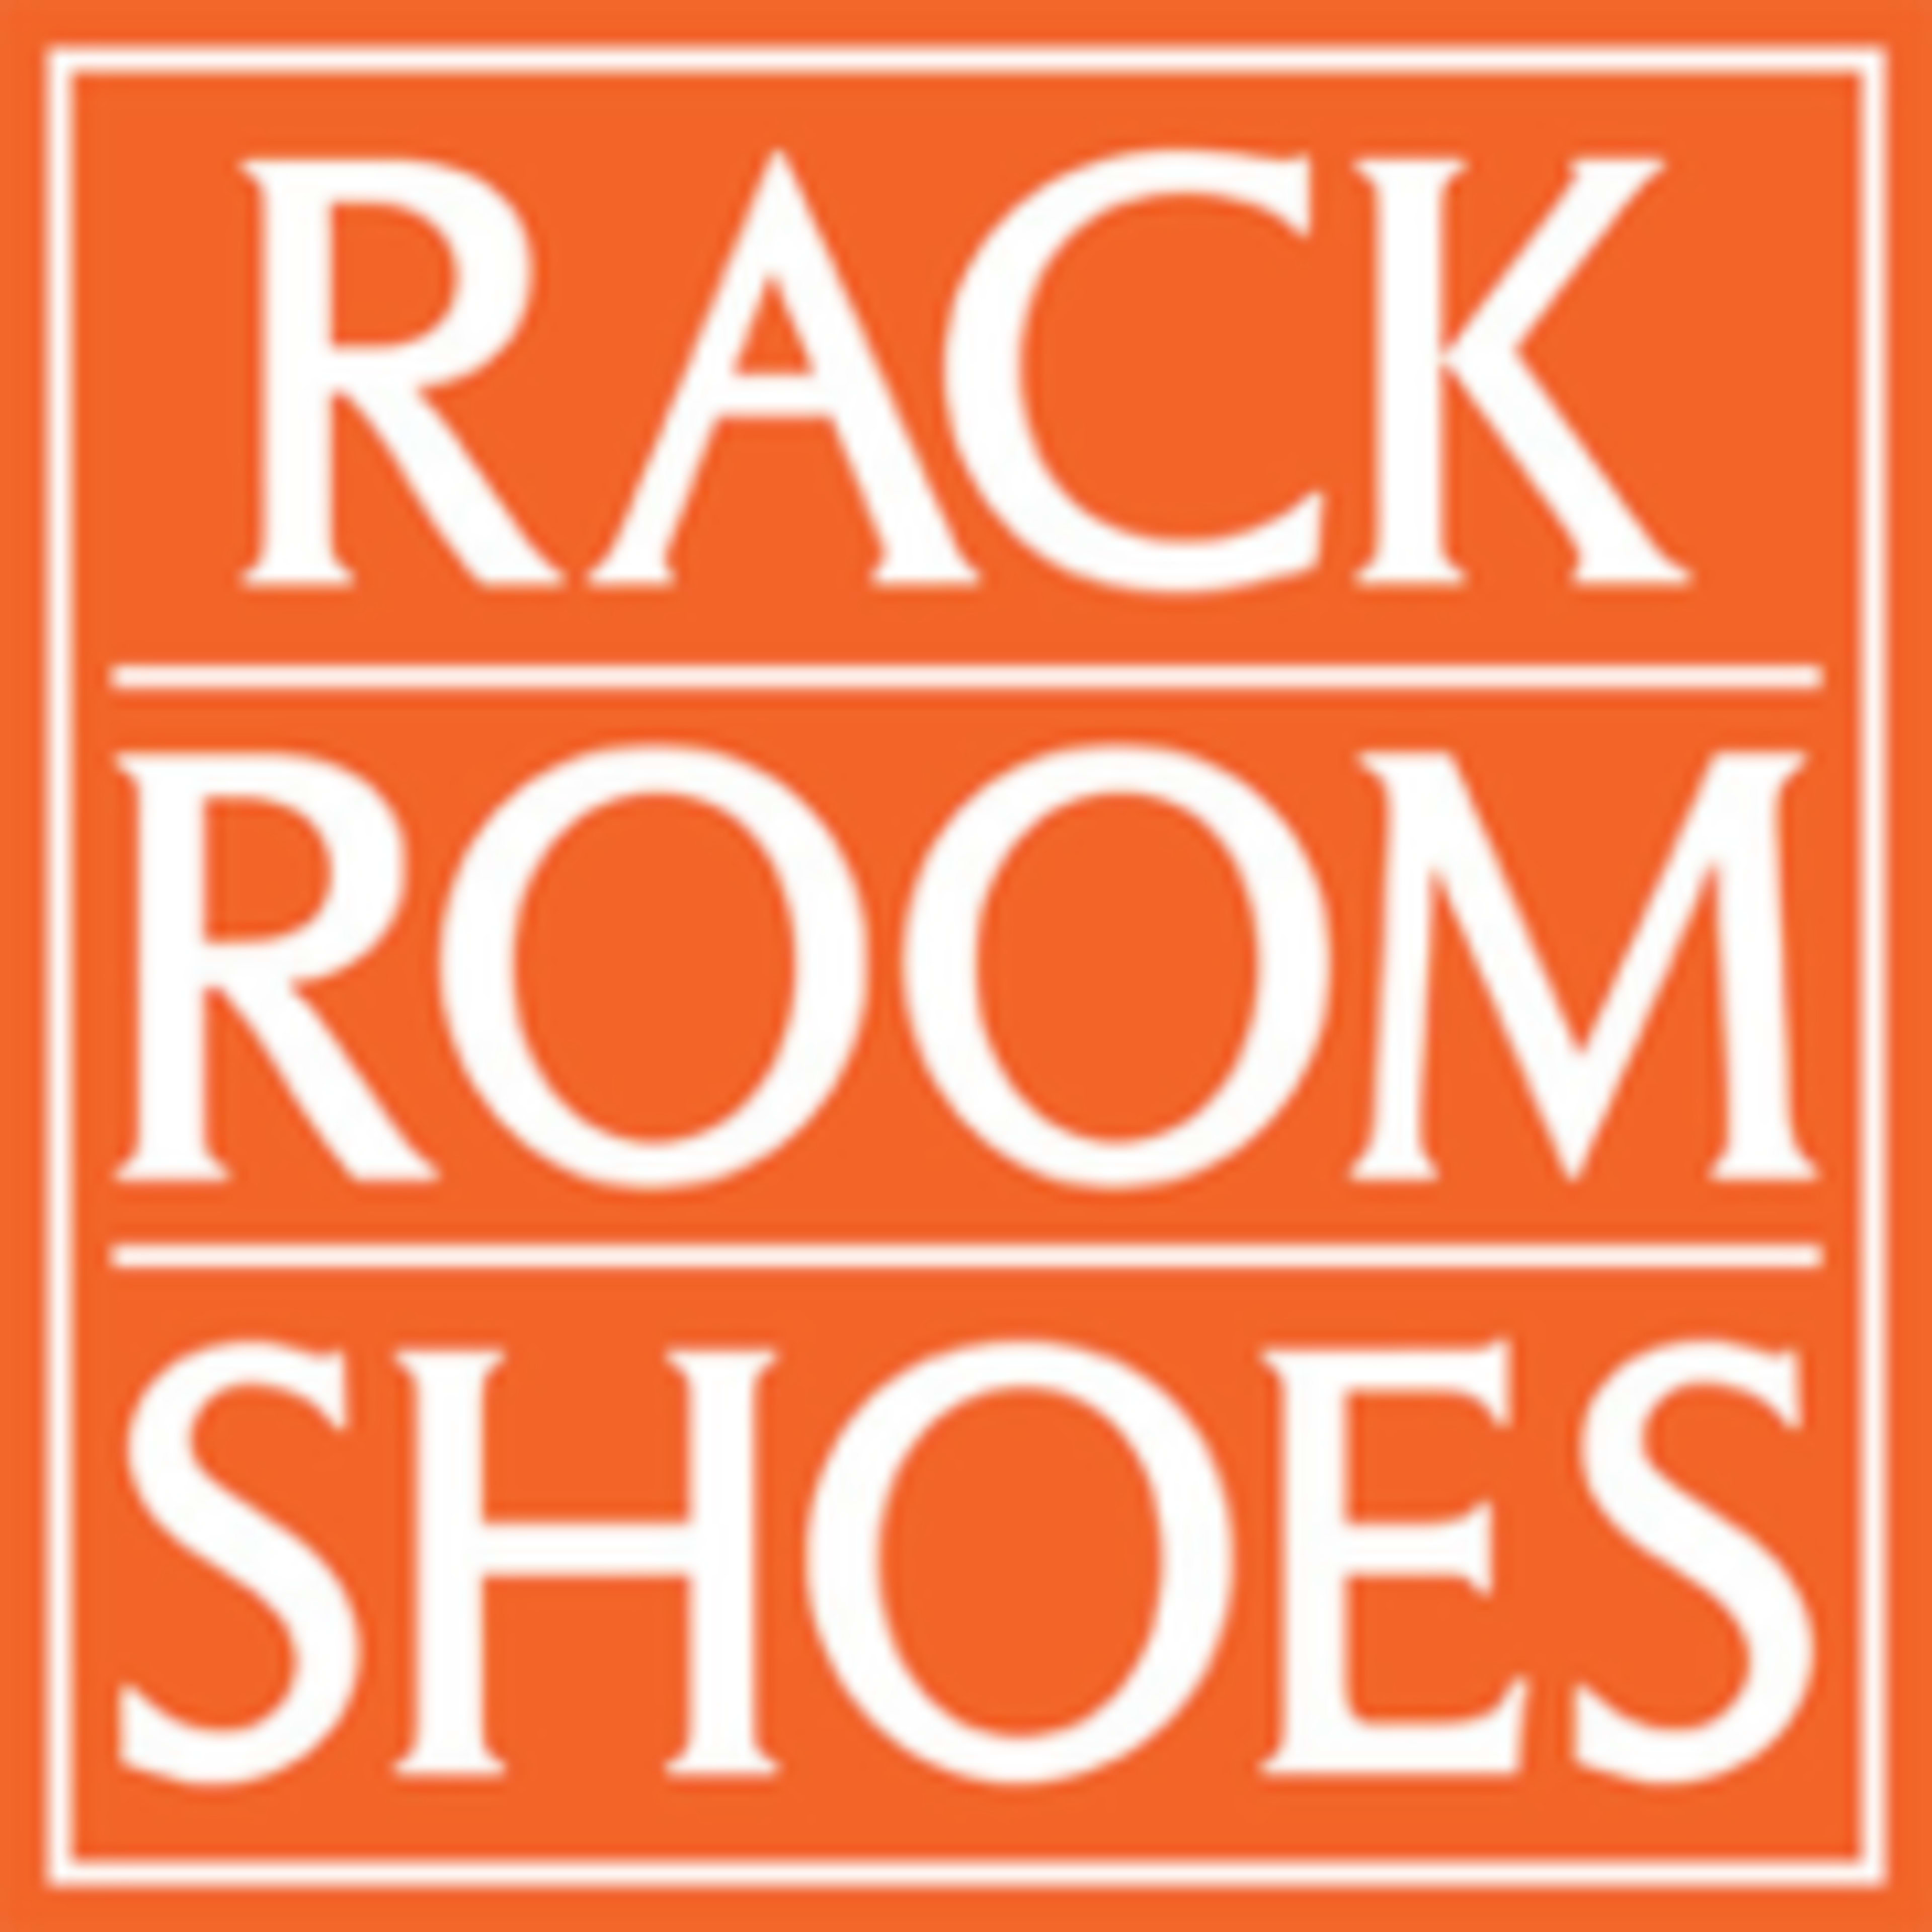 Rackroomshoes.com COUPON CODES - 50% for Feb 2024